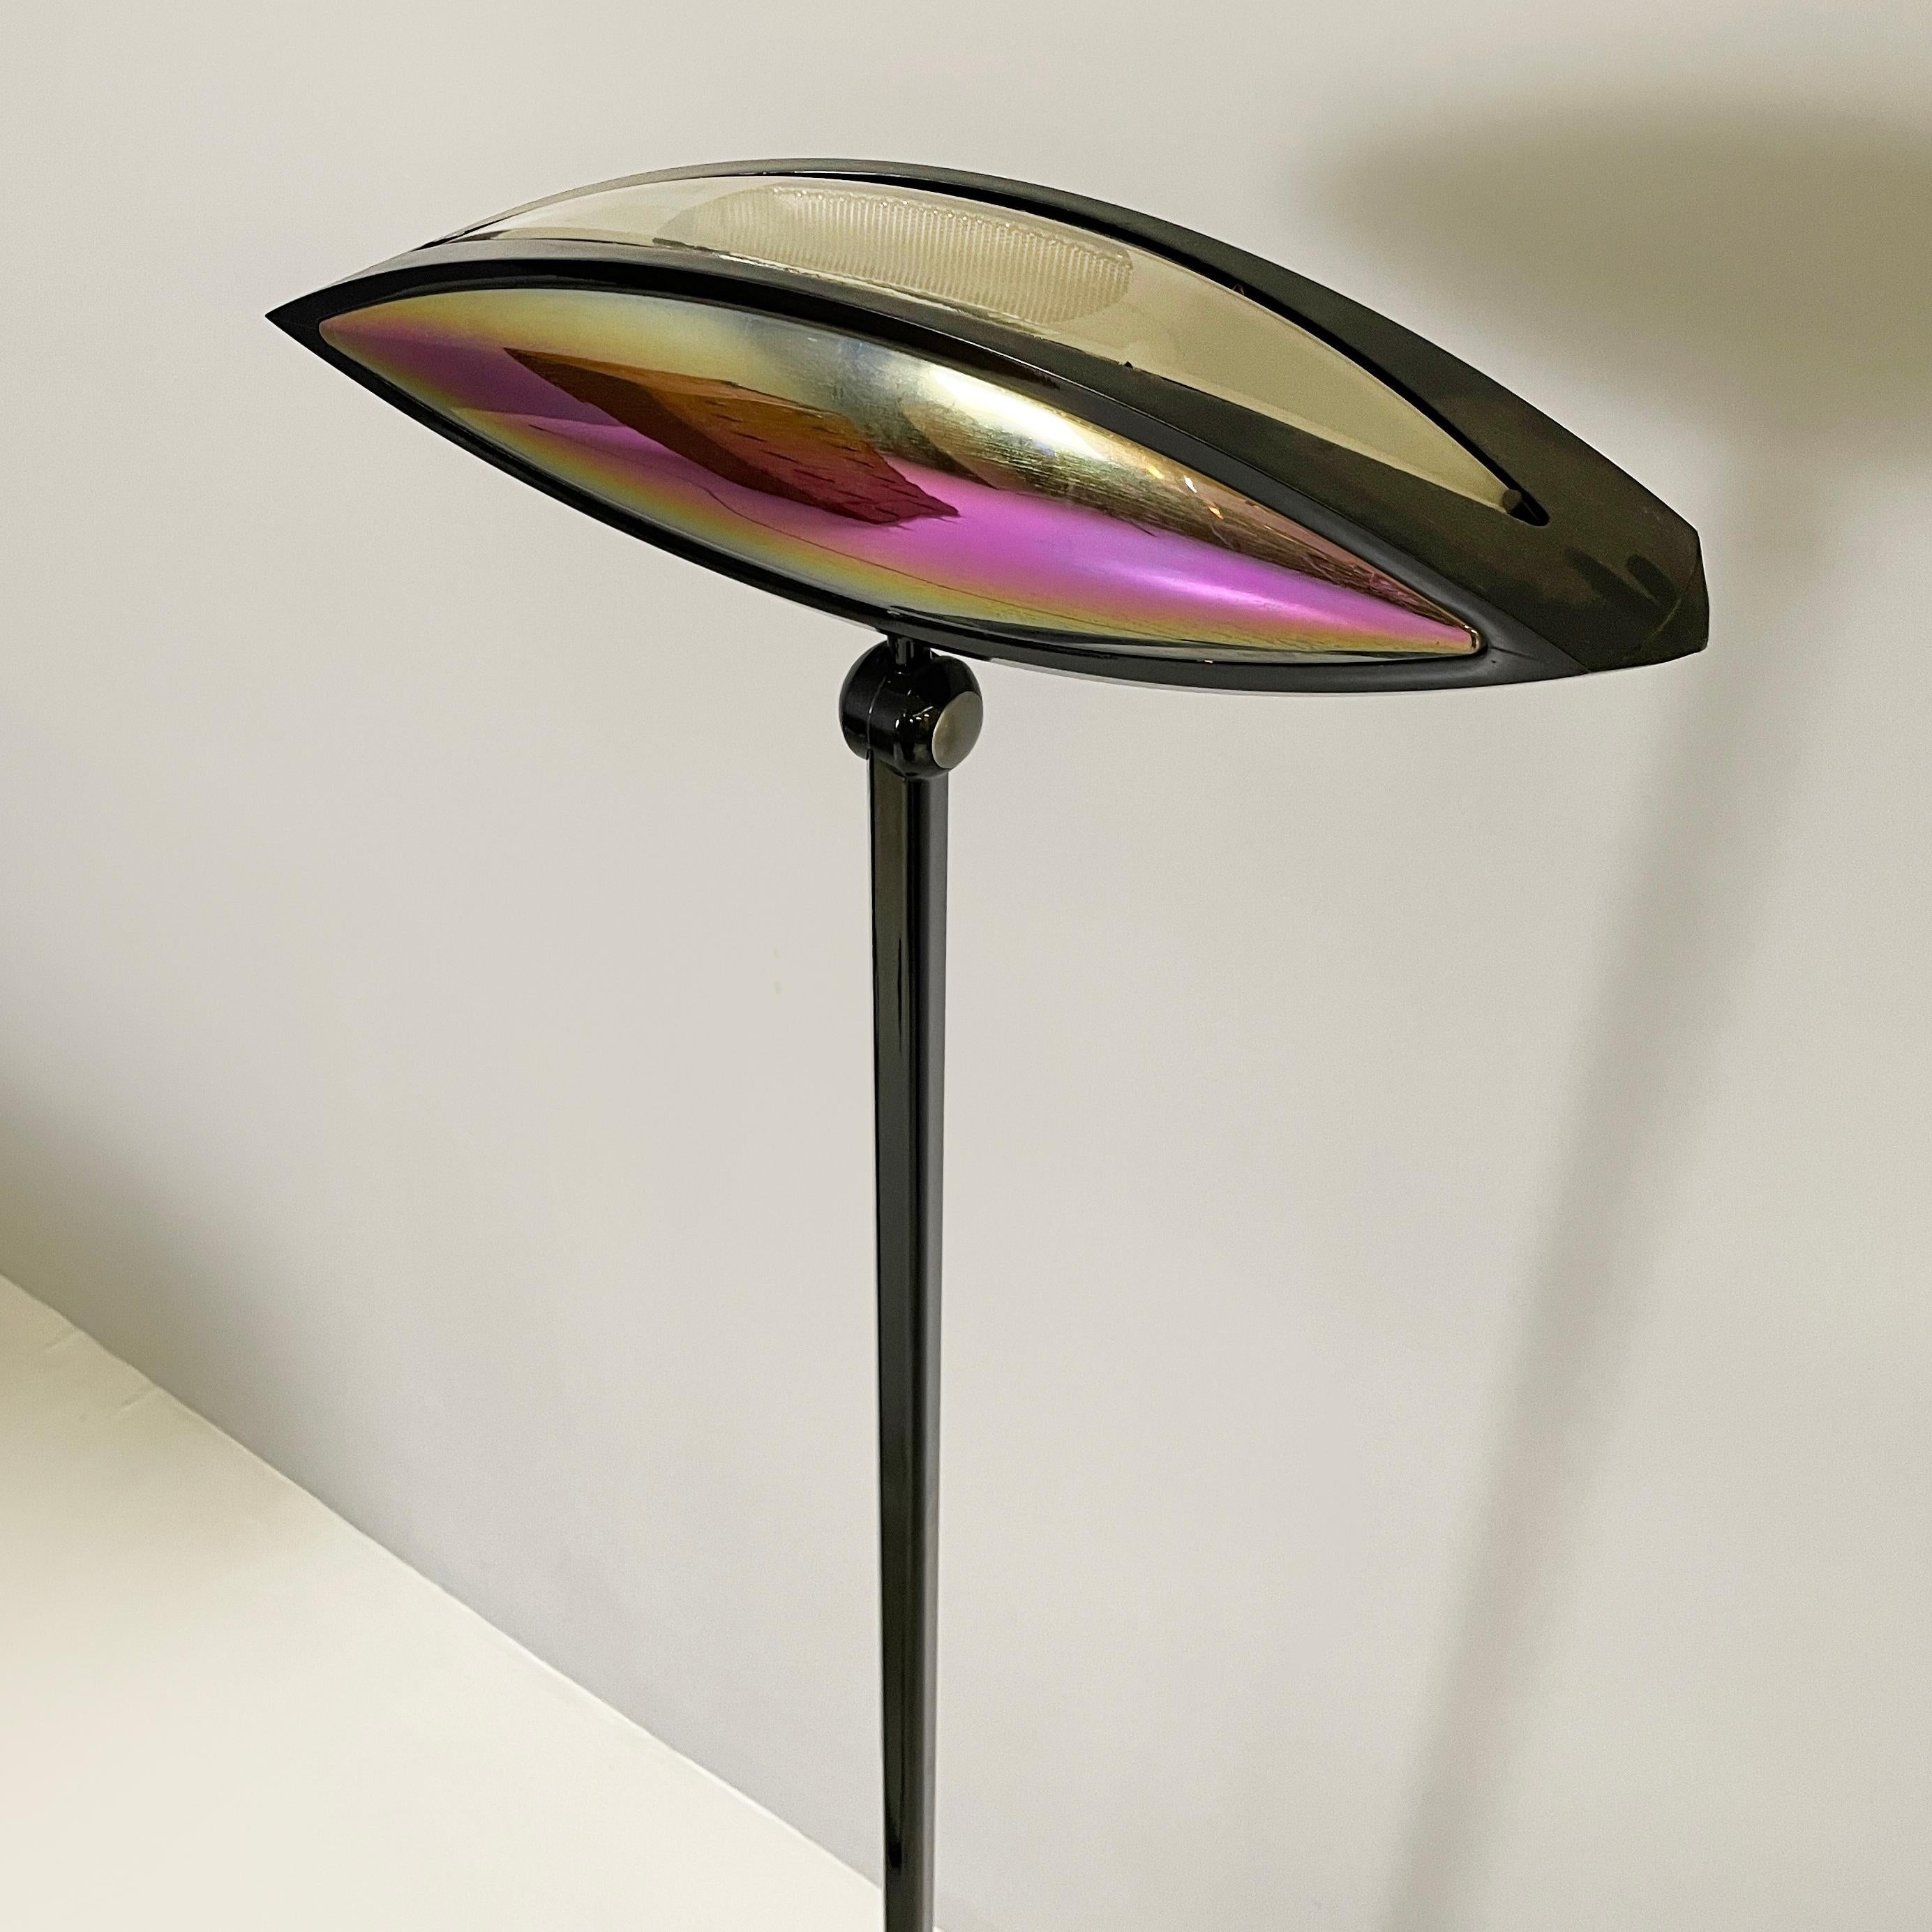 Italian modern color glass and metal Floor lamp Aeto by Lombardo for Flos, 1980s For Sale 1